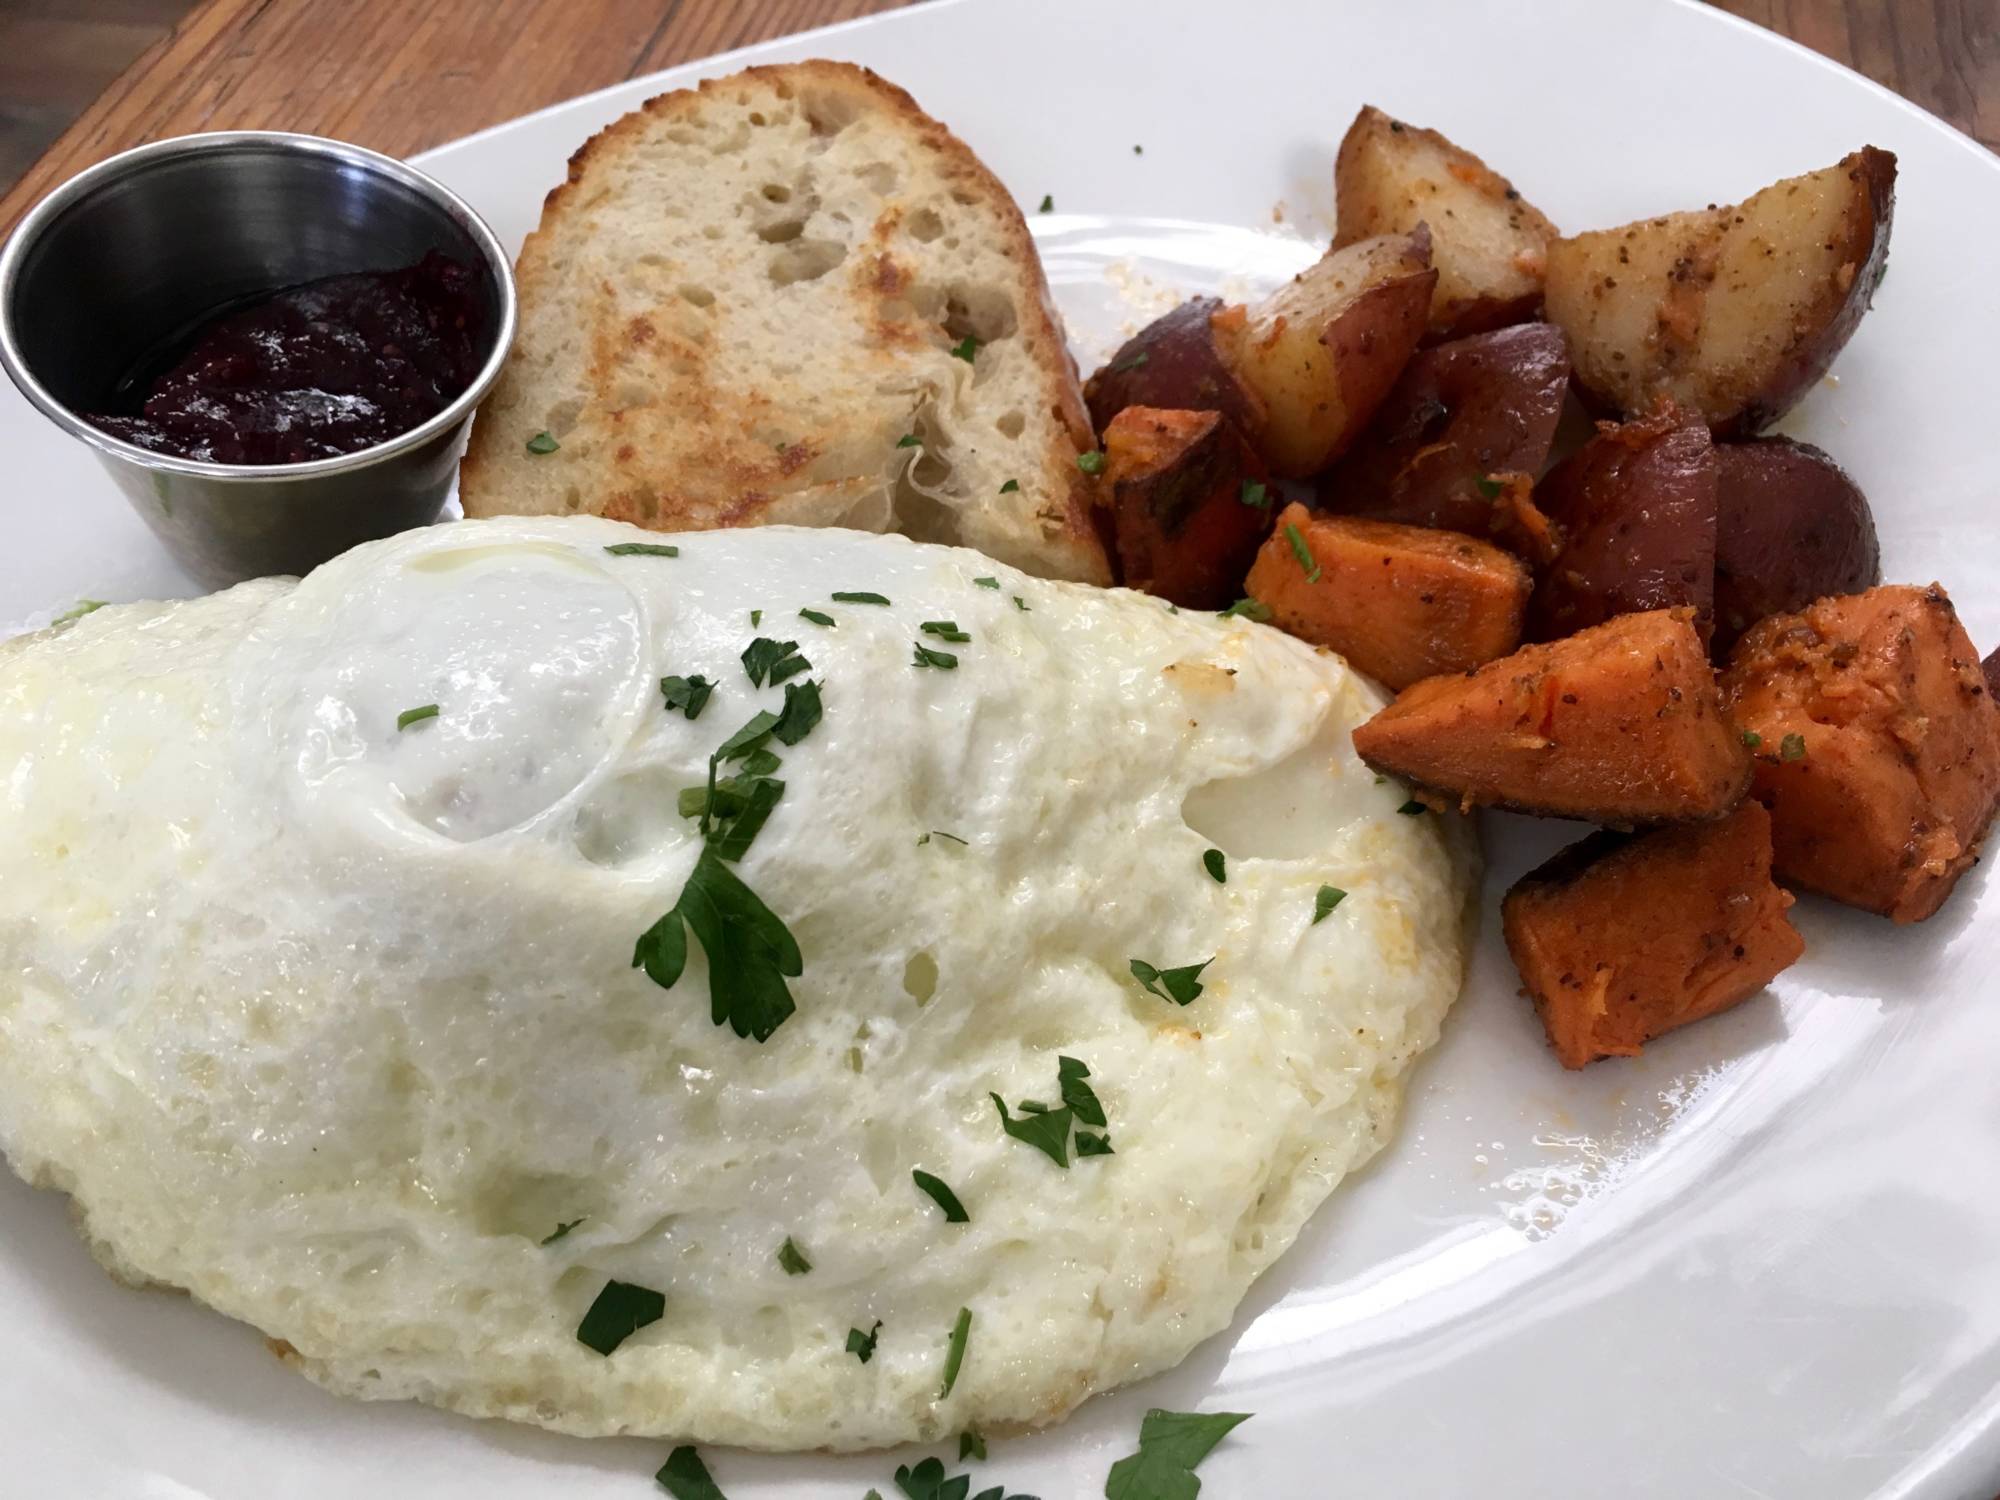 The Diestel Turkey Egg White Omelet at Local Union 271.